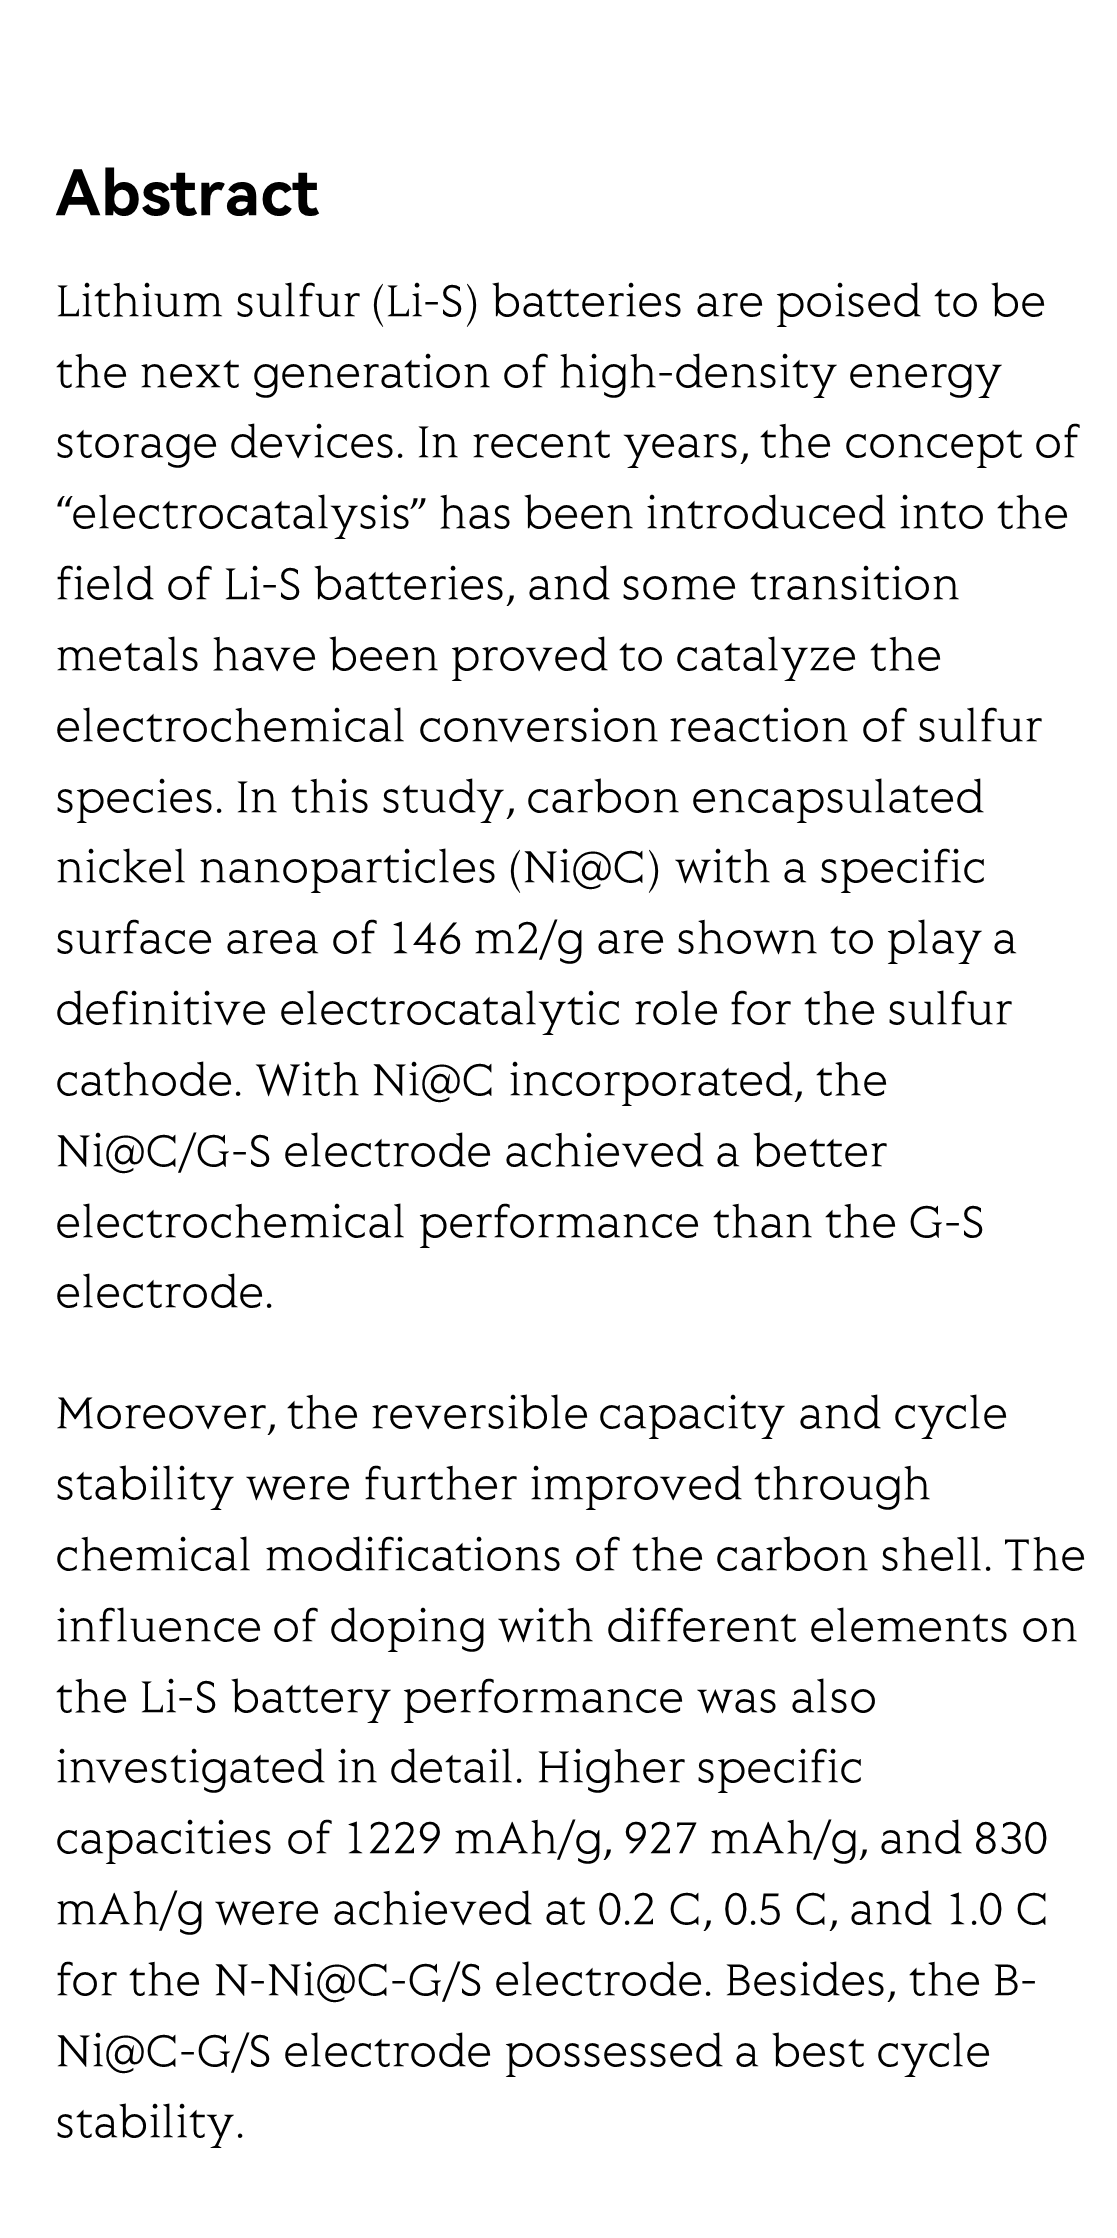 Carbon Encapsulated Nickel Nanocomposites for the Cathode in Advanced Lithium Sulfur Batteries_2